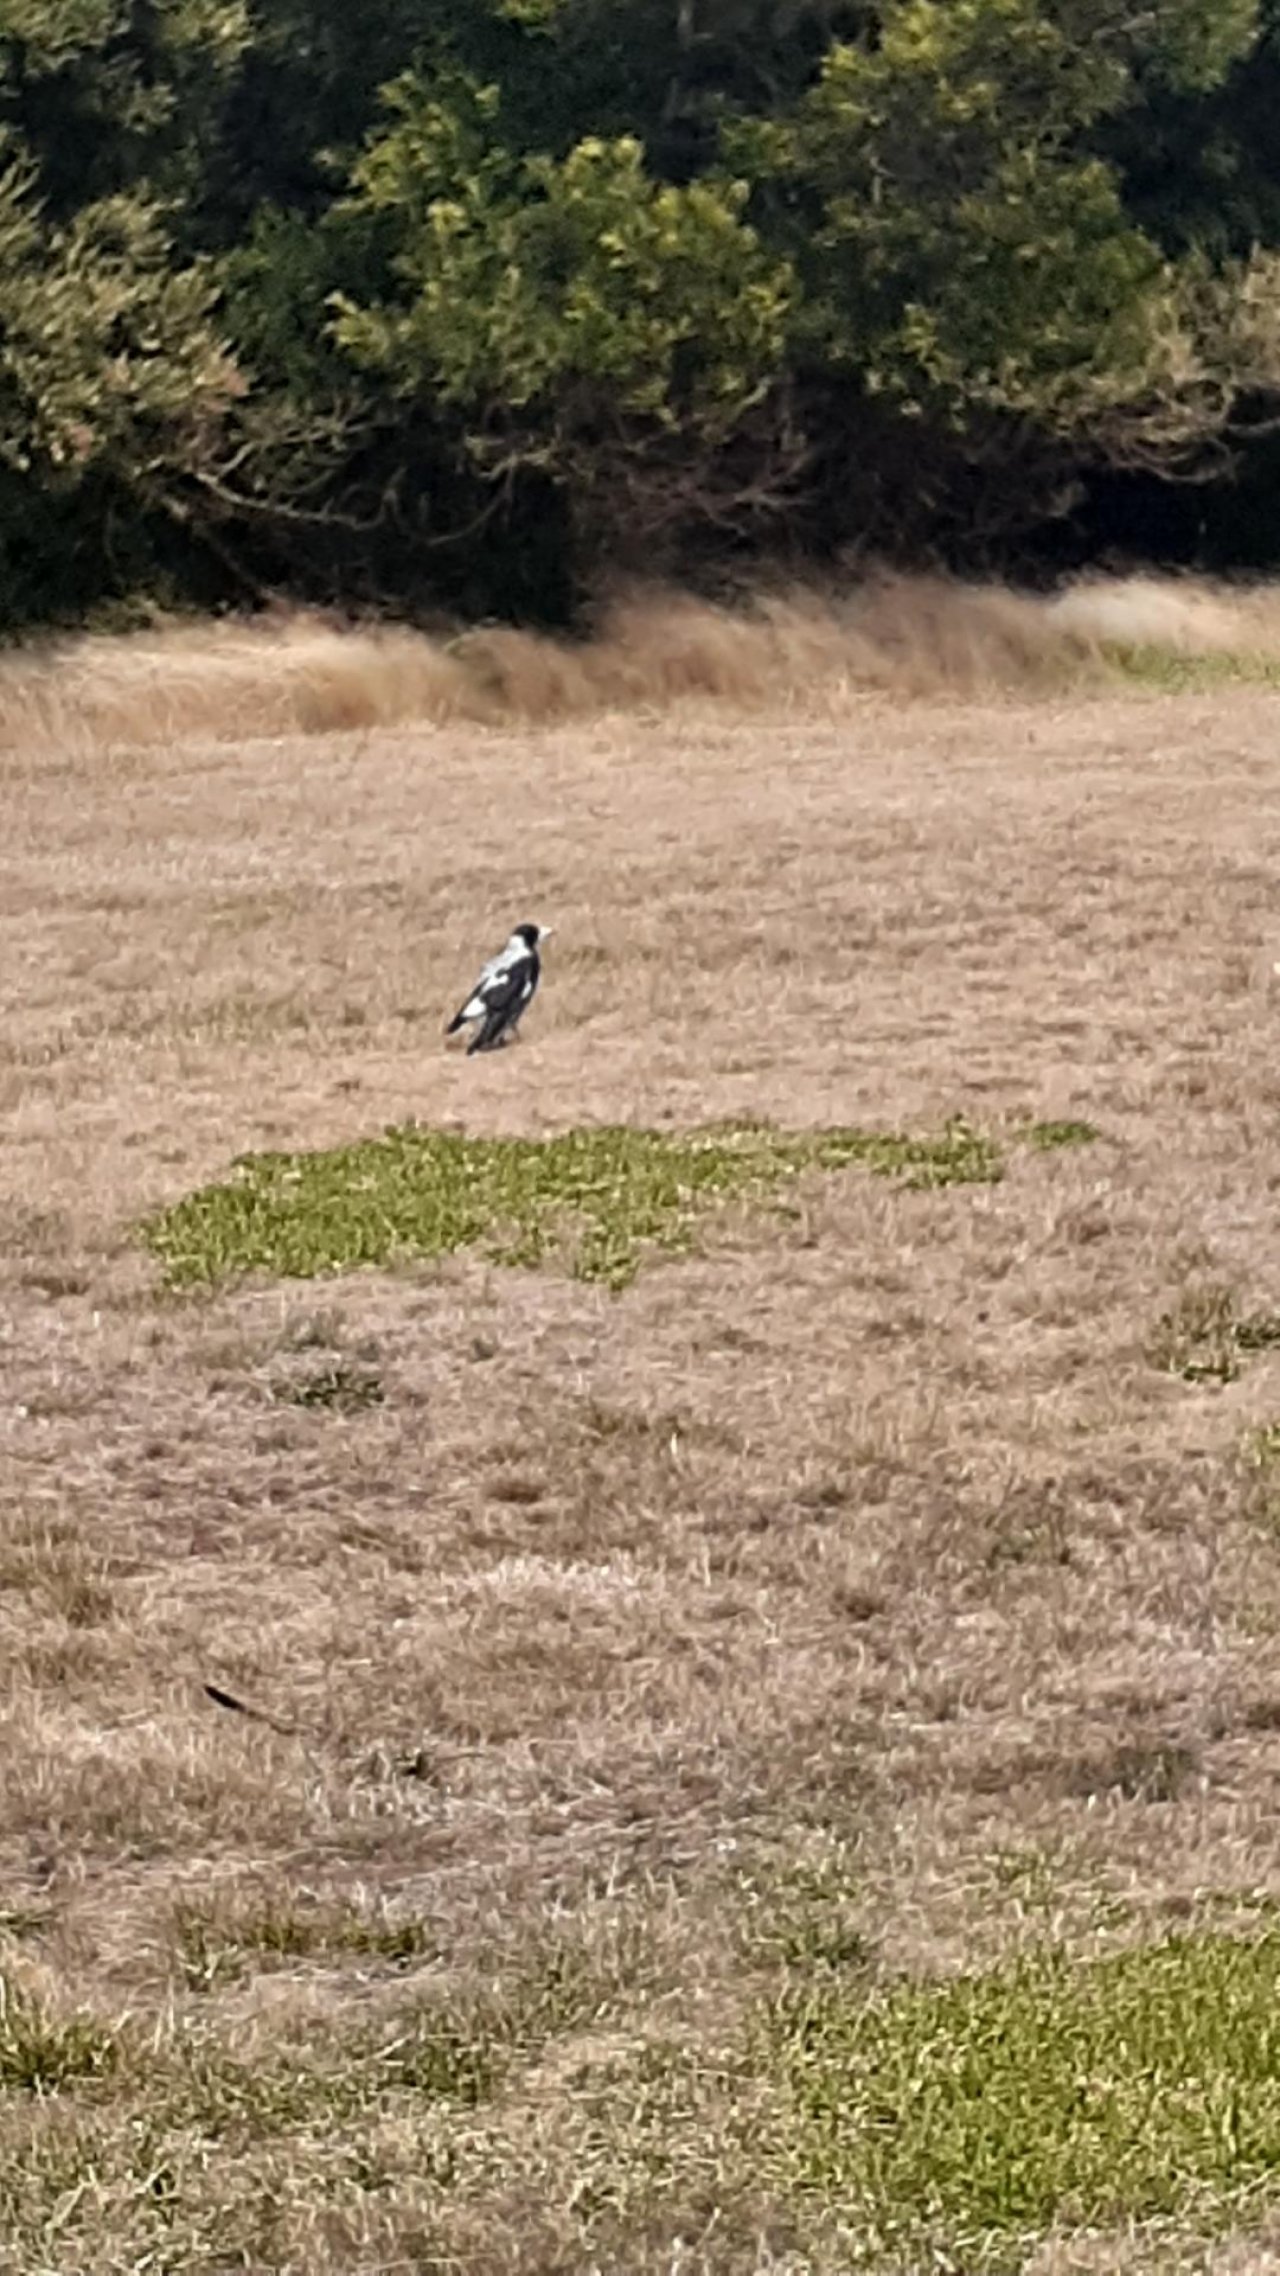 Australian Magpie in ClimateWatch App spotted by Luke, Plip on 25.02.2021